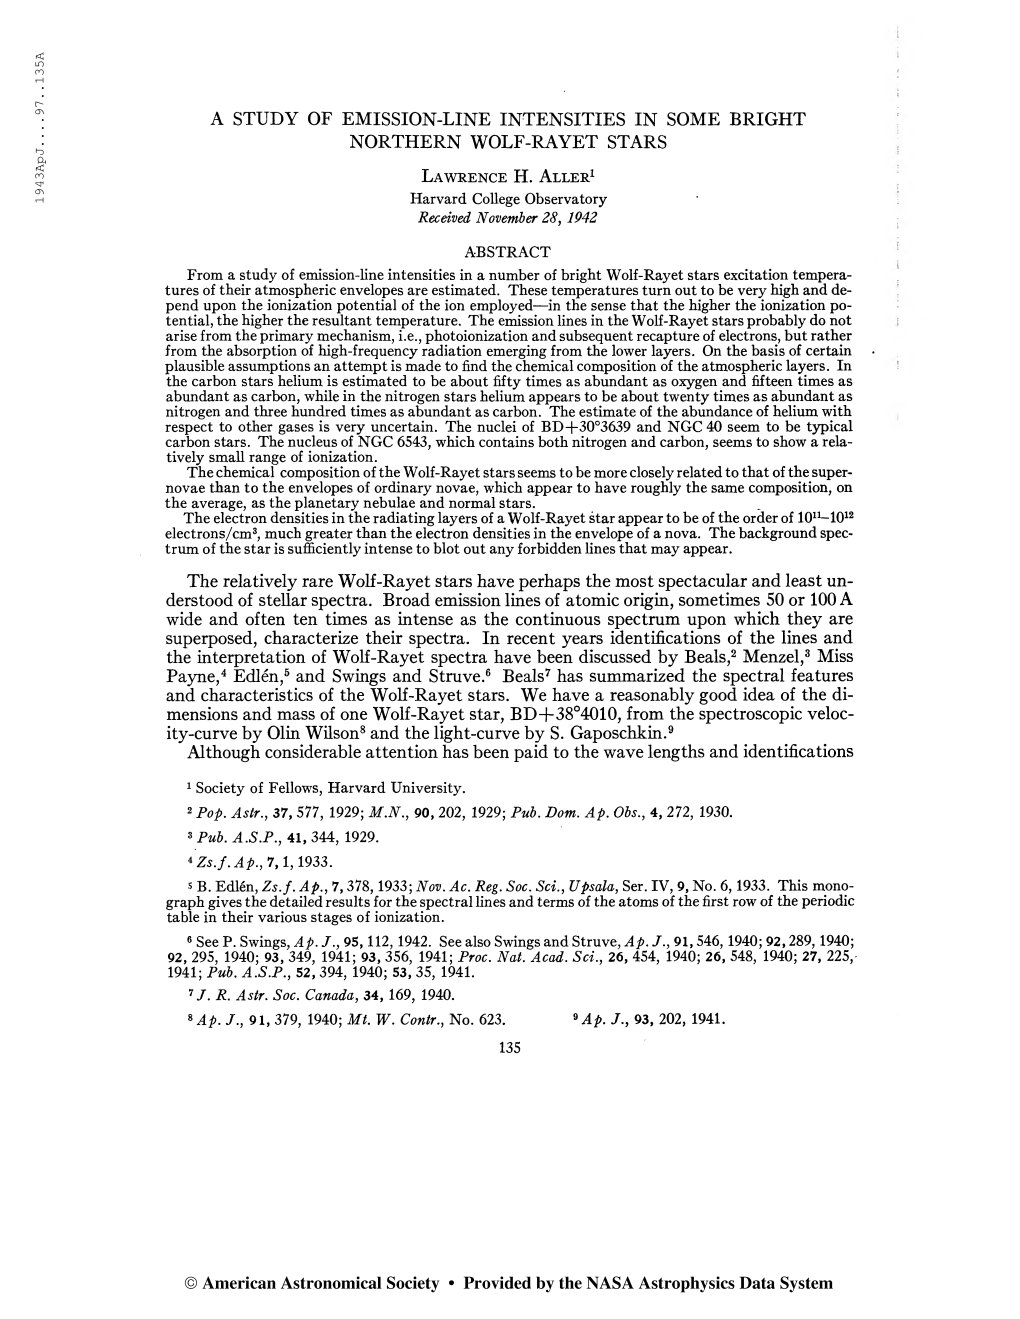 1943Apj 97 . . 135A a STUDY of EMISSION-LINE INTENSITIES IN